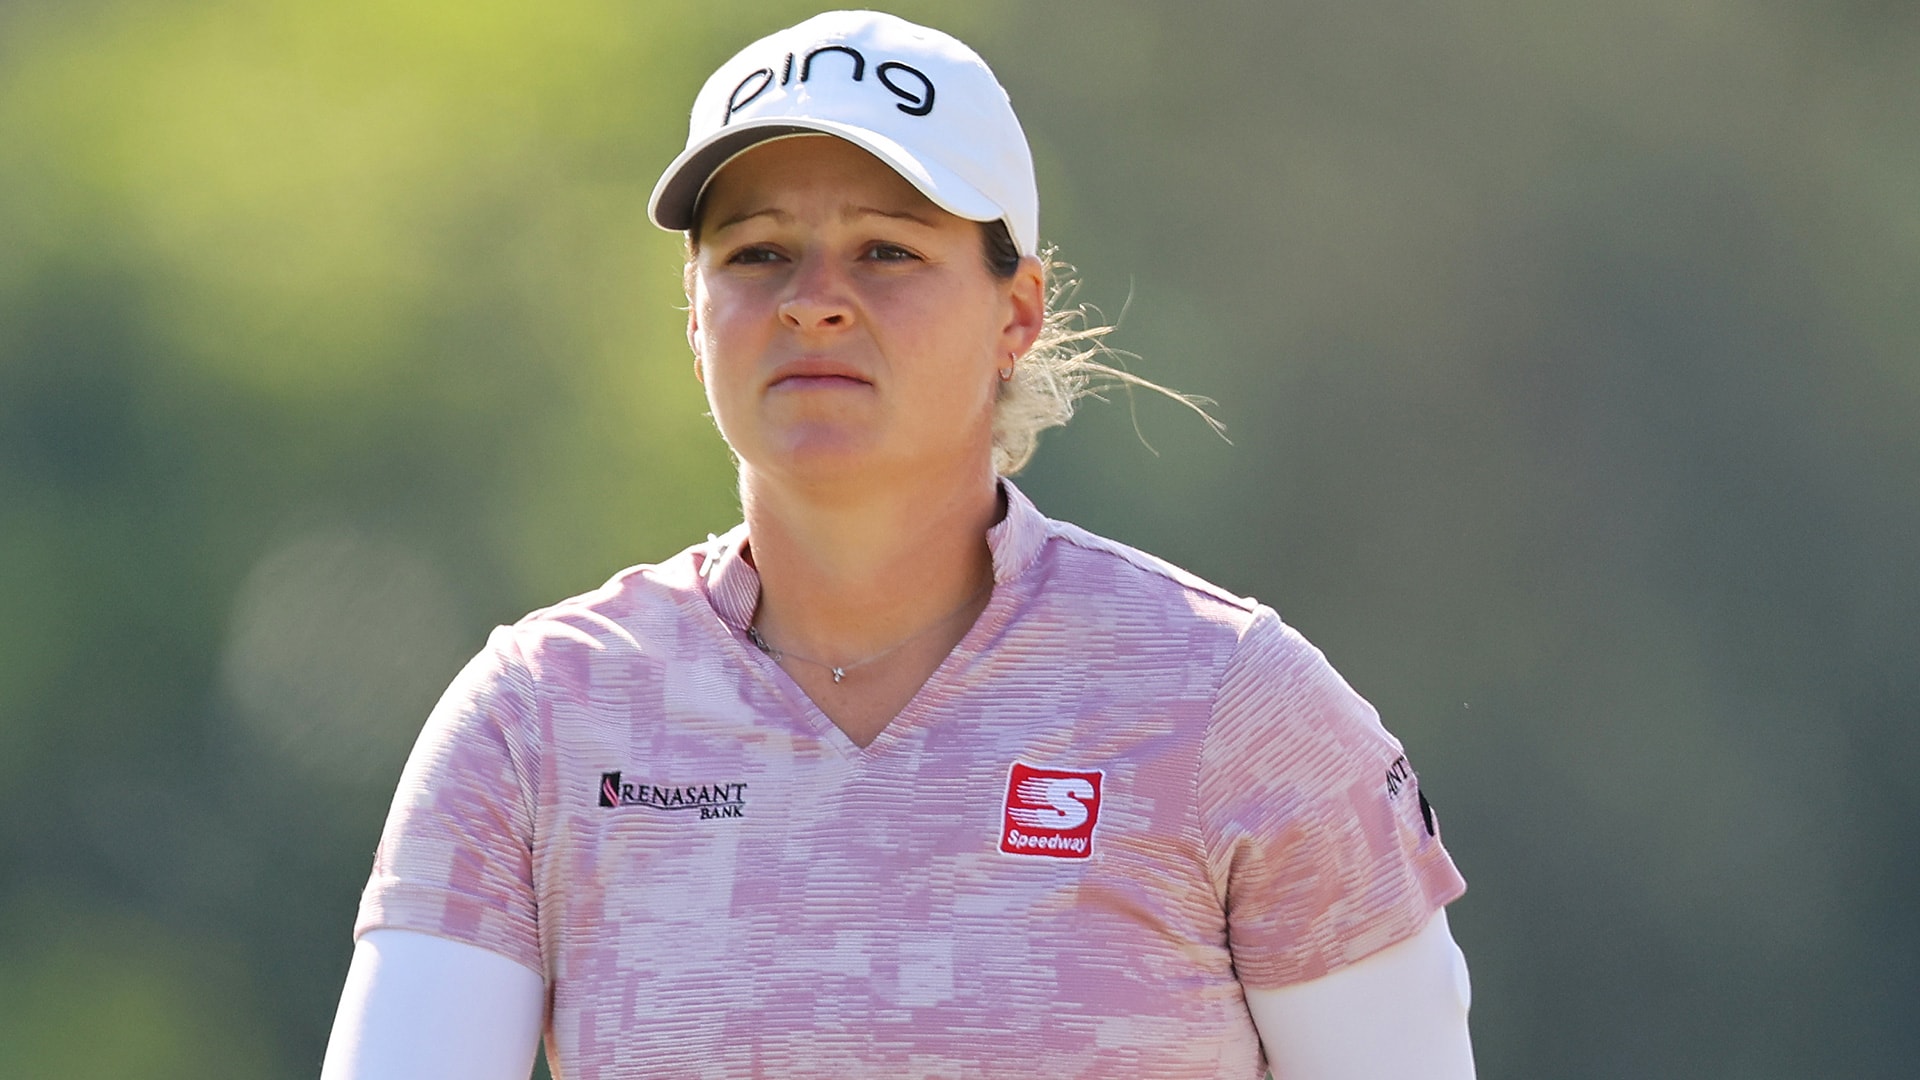 LPGA’s Ally Ewing plays caddie at AT&T to get sneak peek of Pebble for USWO